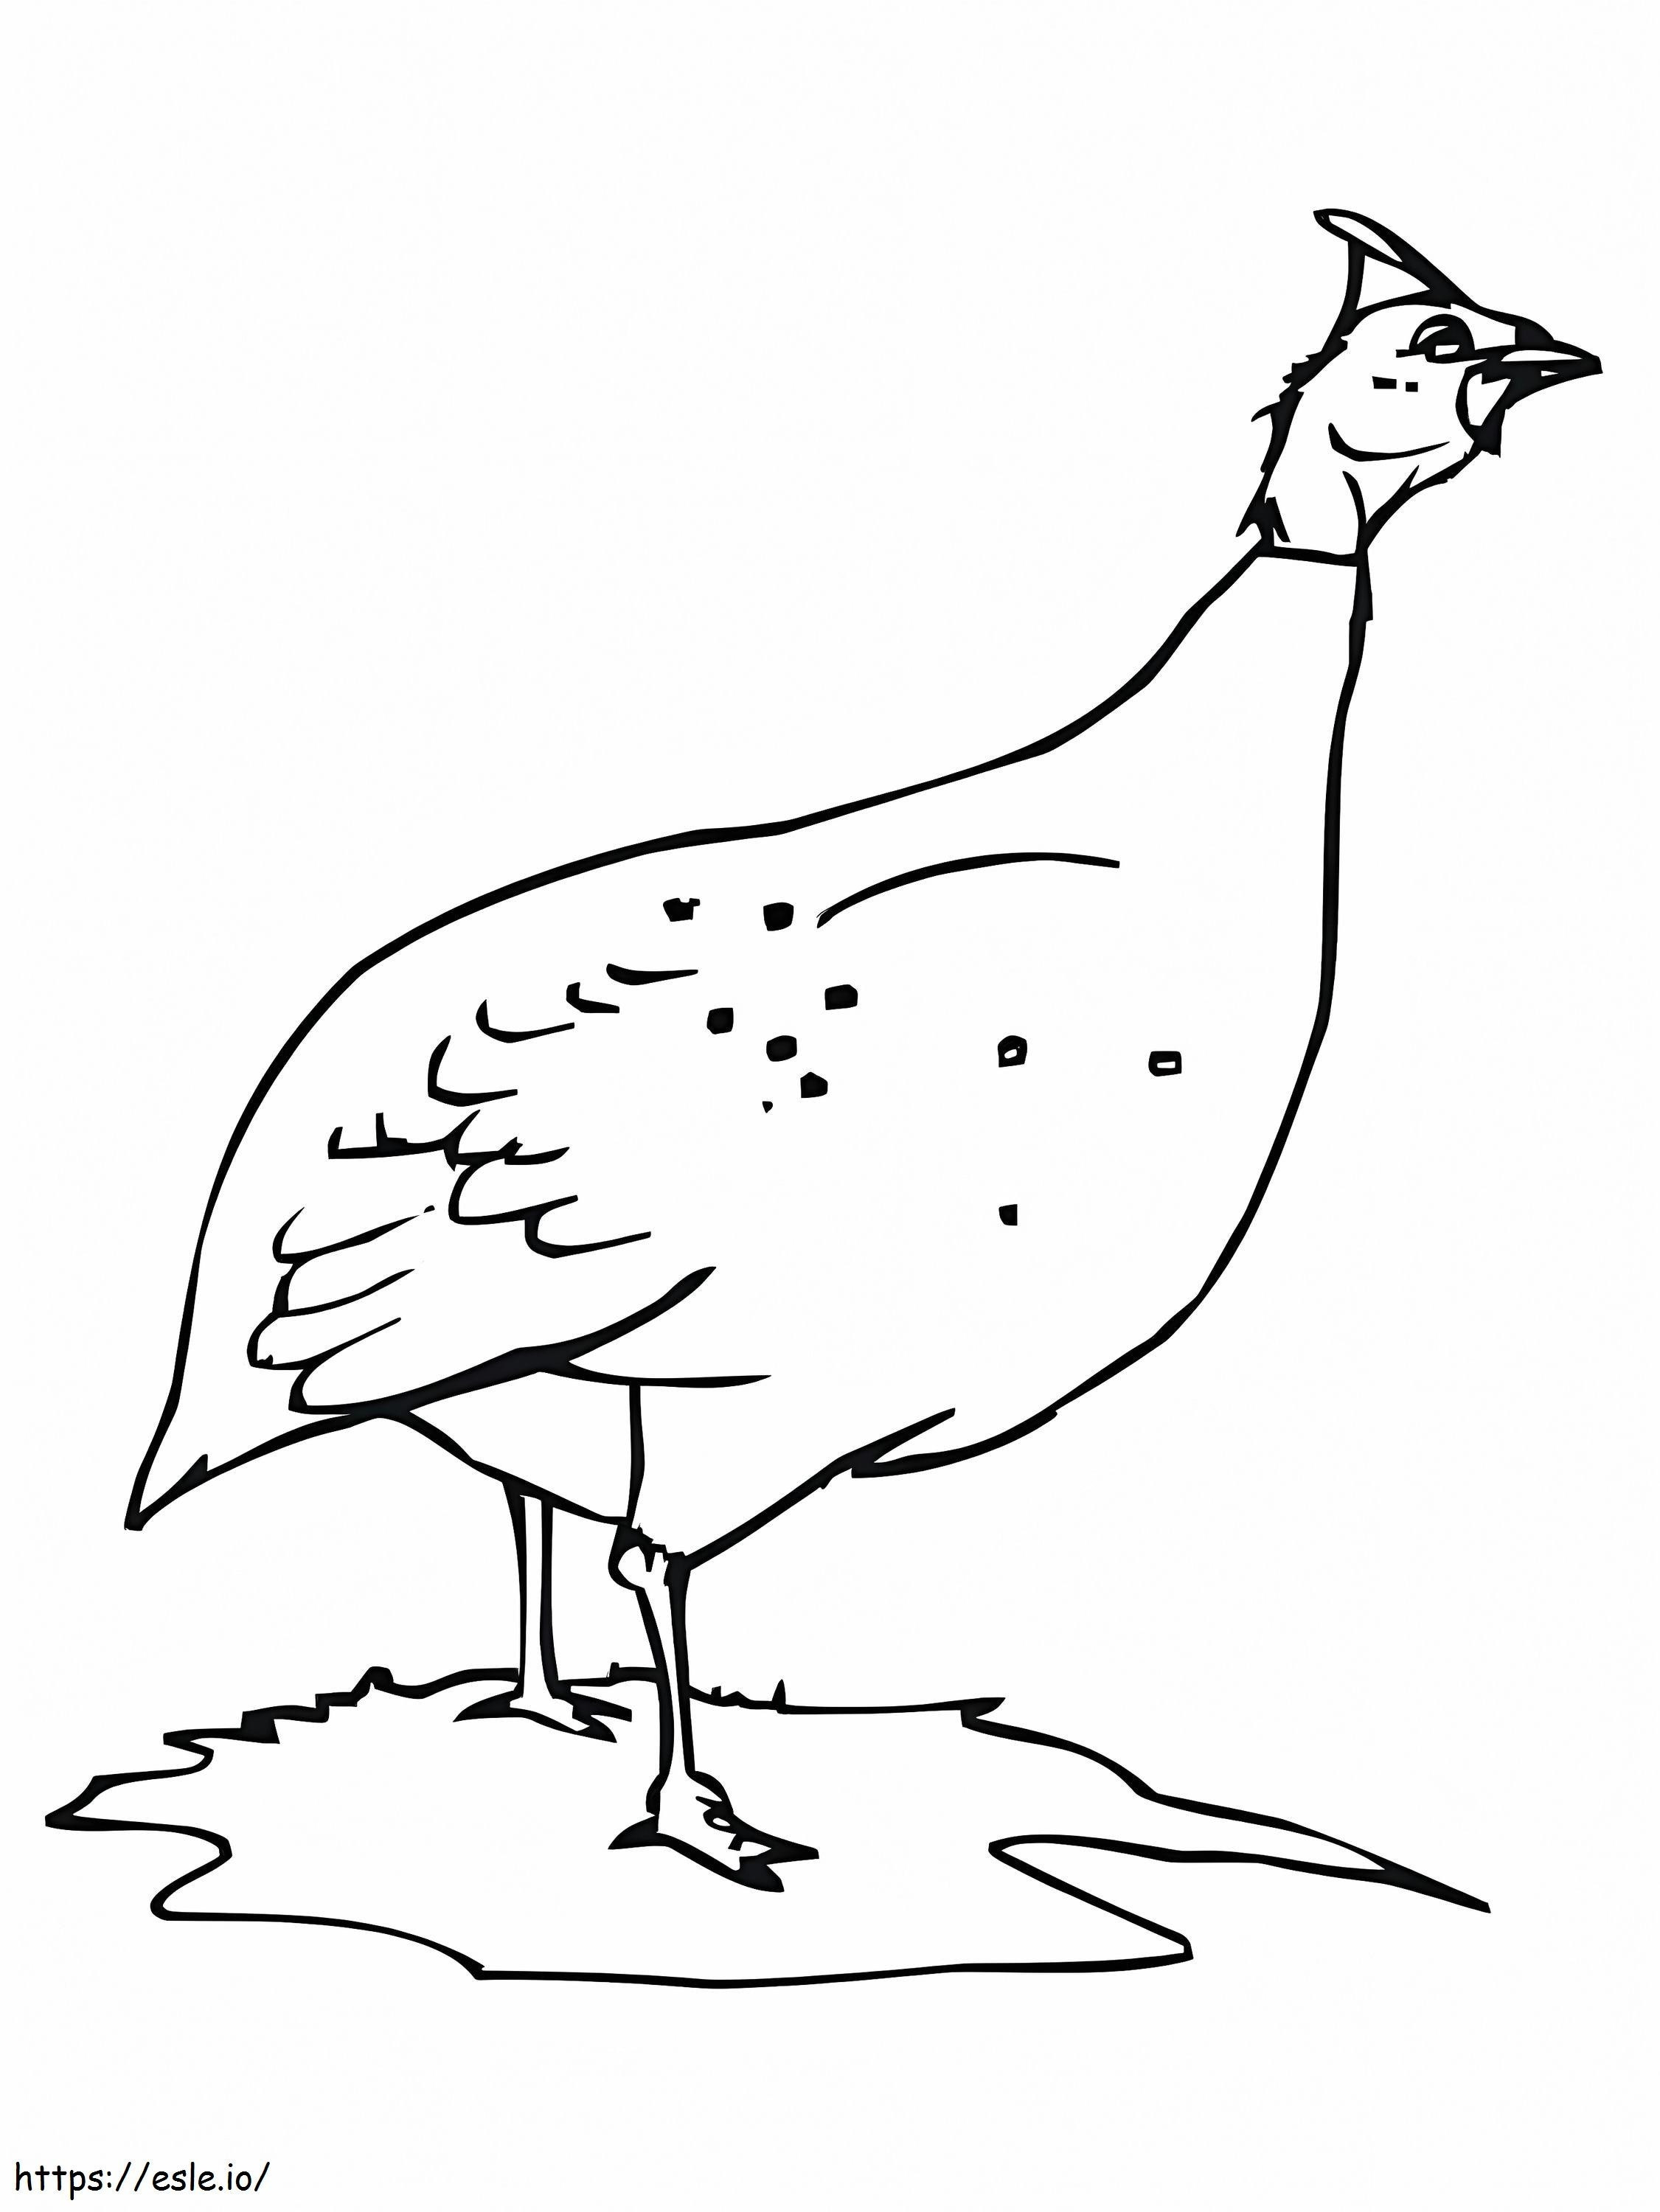 Hen Or Guinea Fowl coloring page